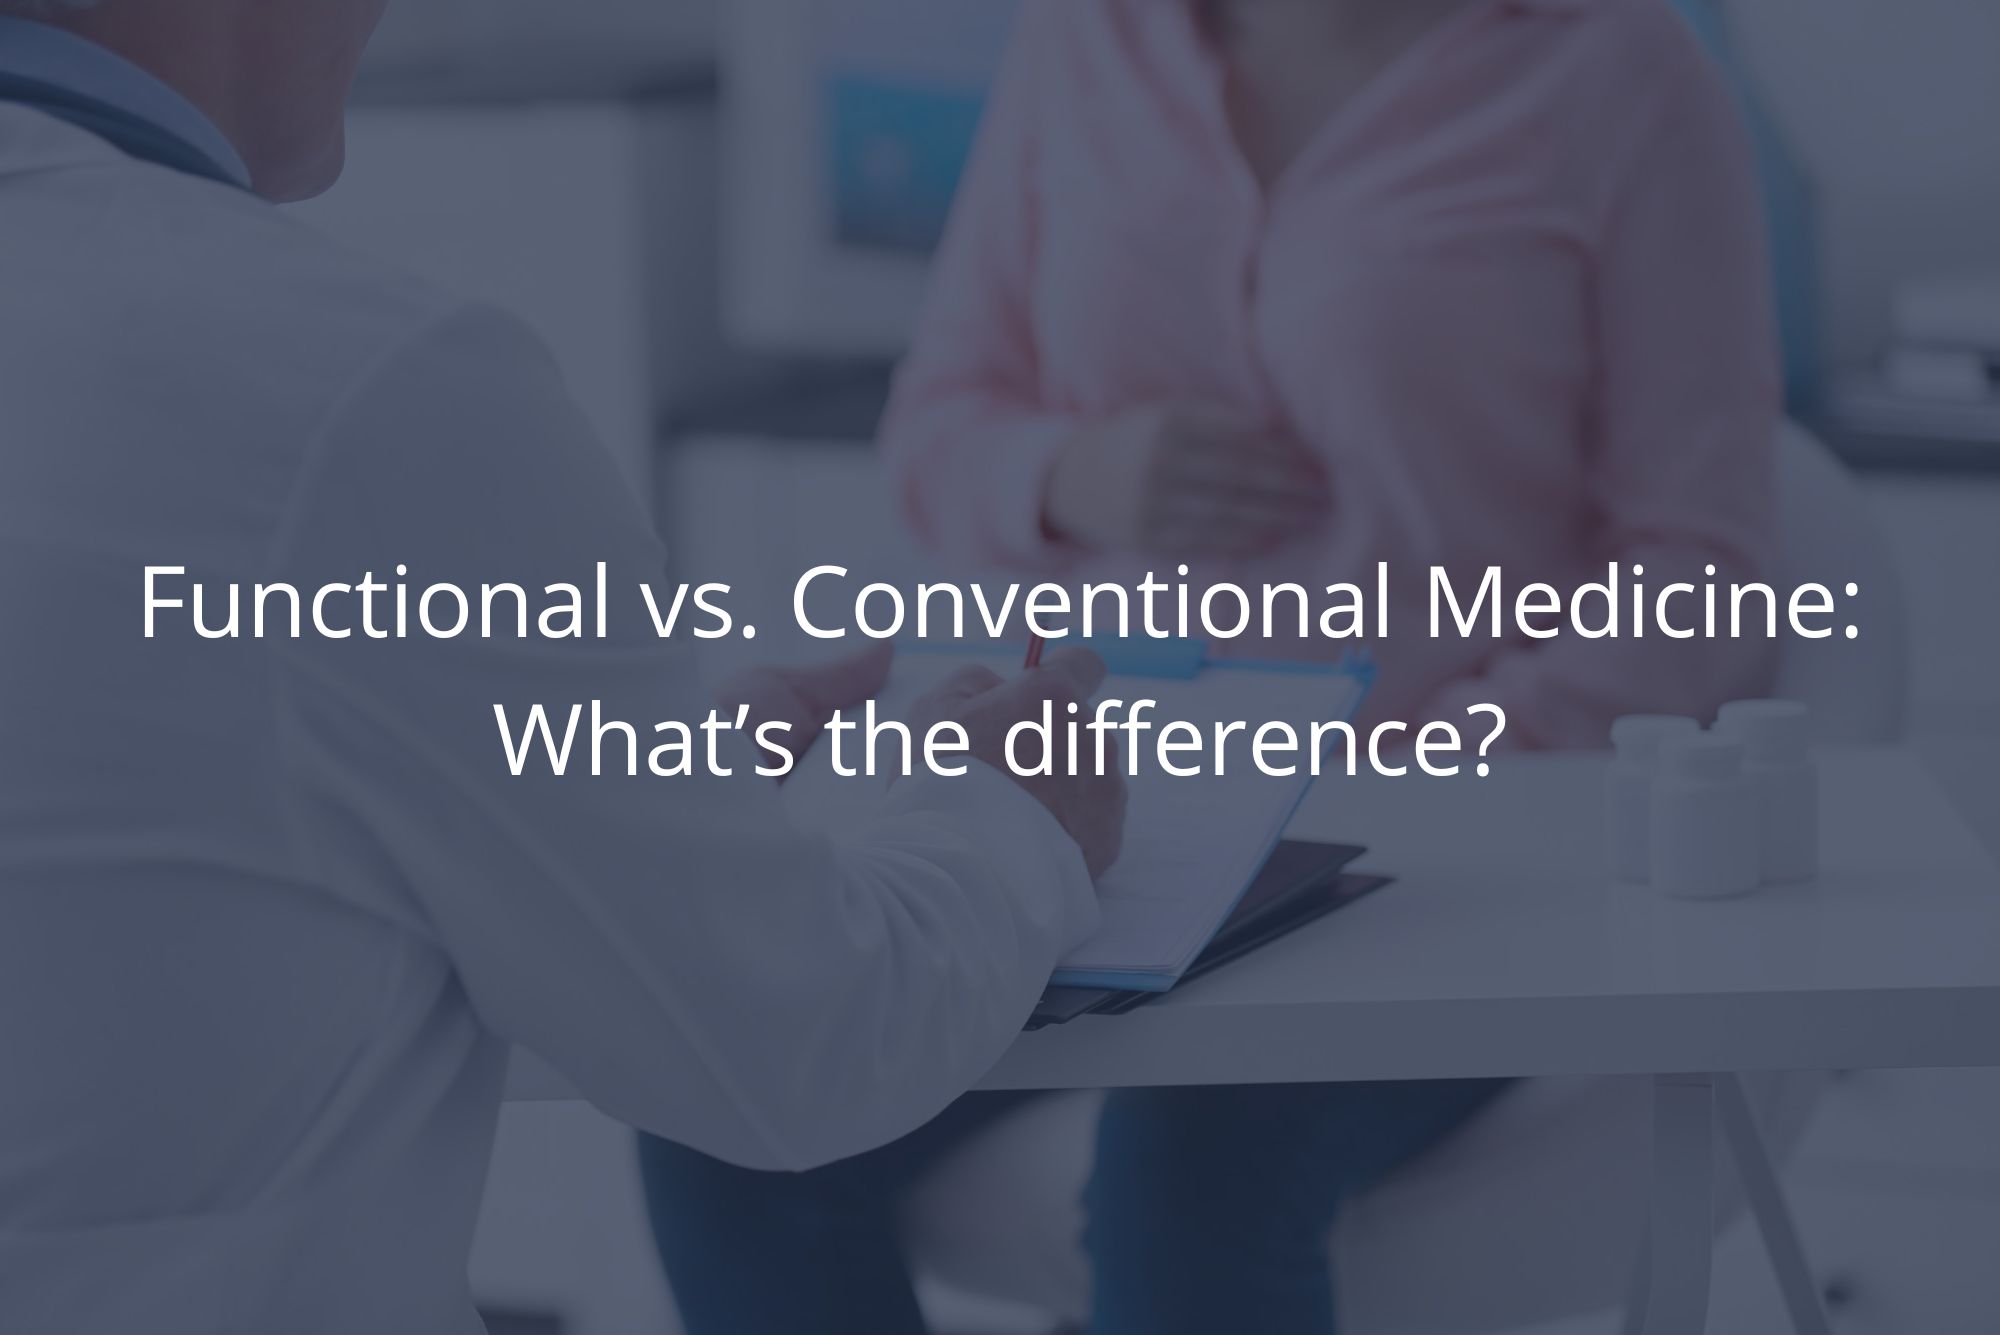 A woman and a doctor discuss the differences between functional medicine and conventional medicine.